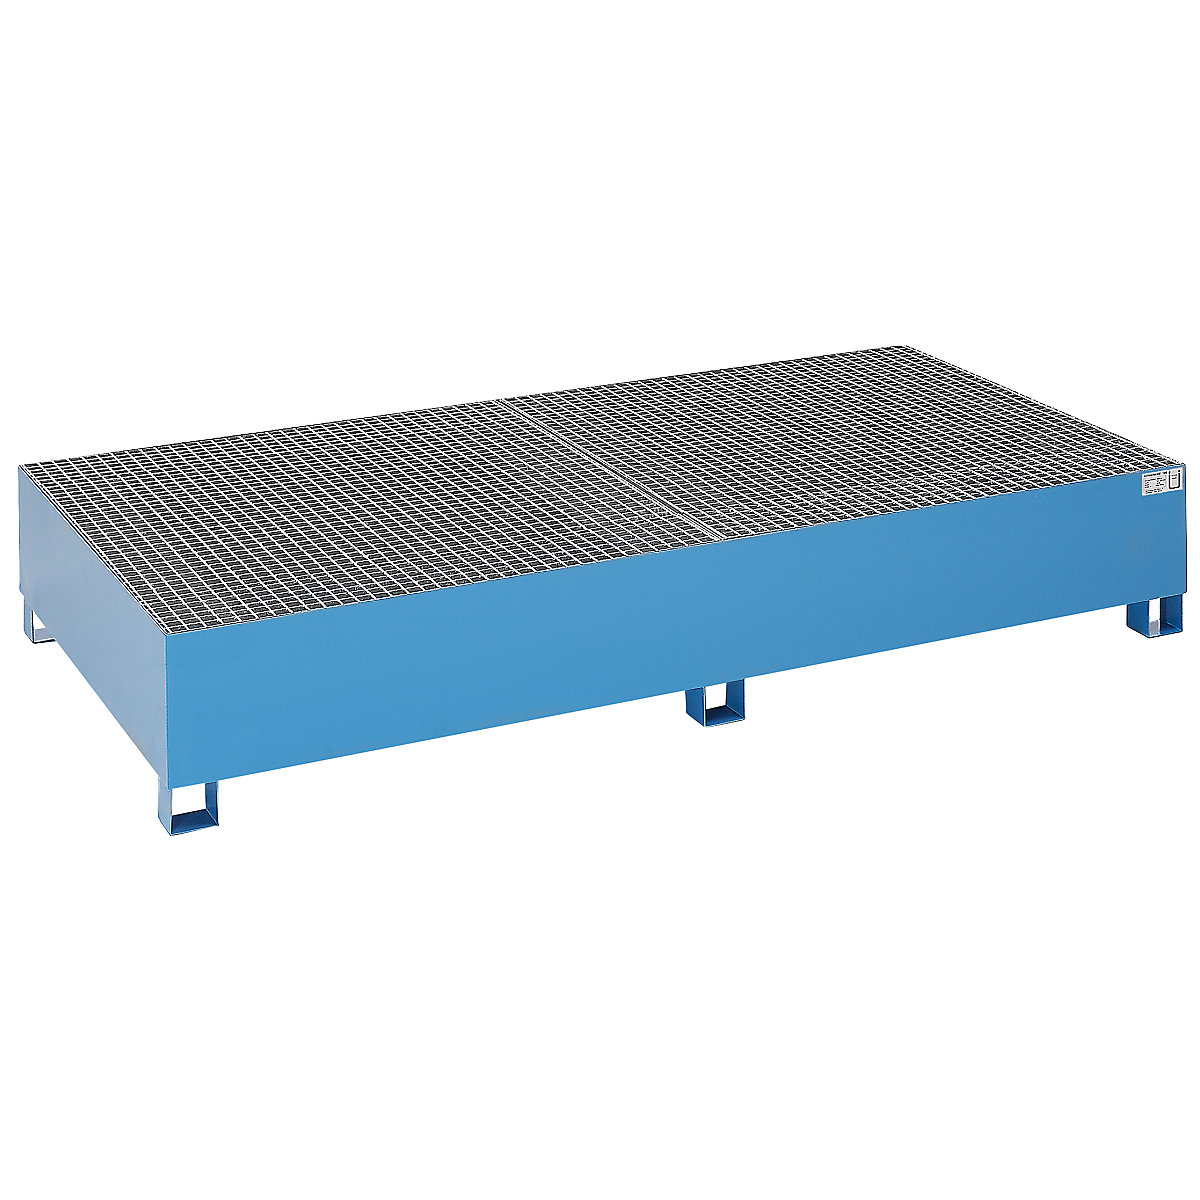 Steel sump tray for IBC/CTC tank containers – eurokraft basic